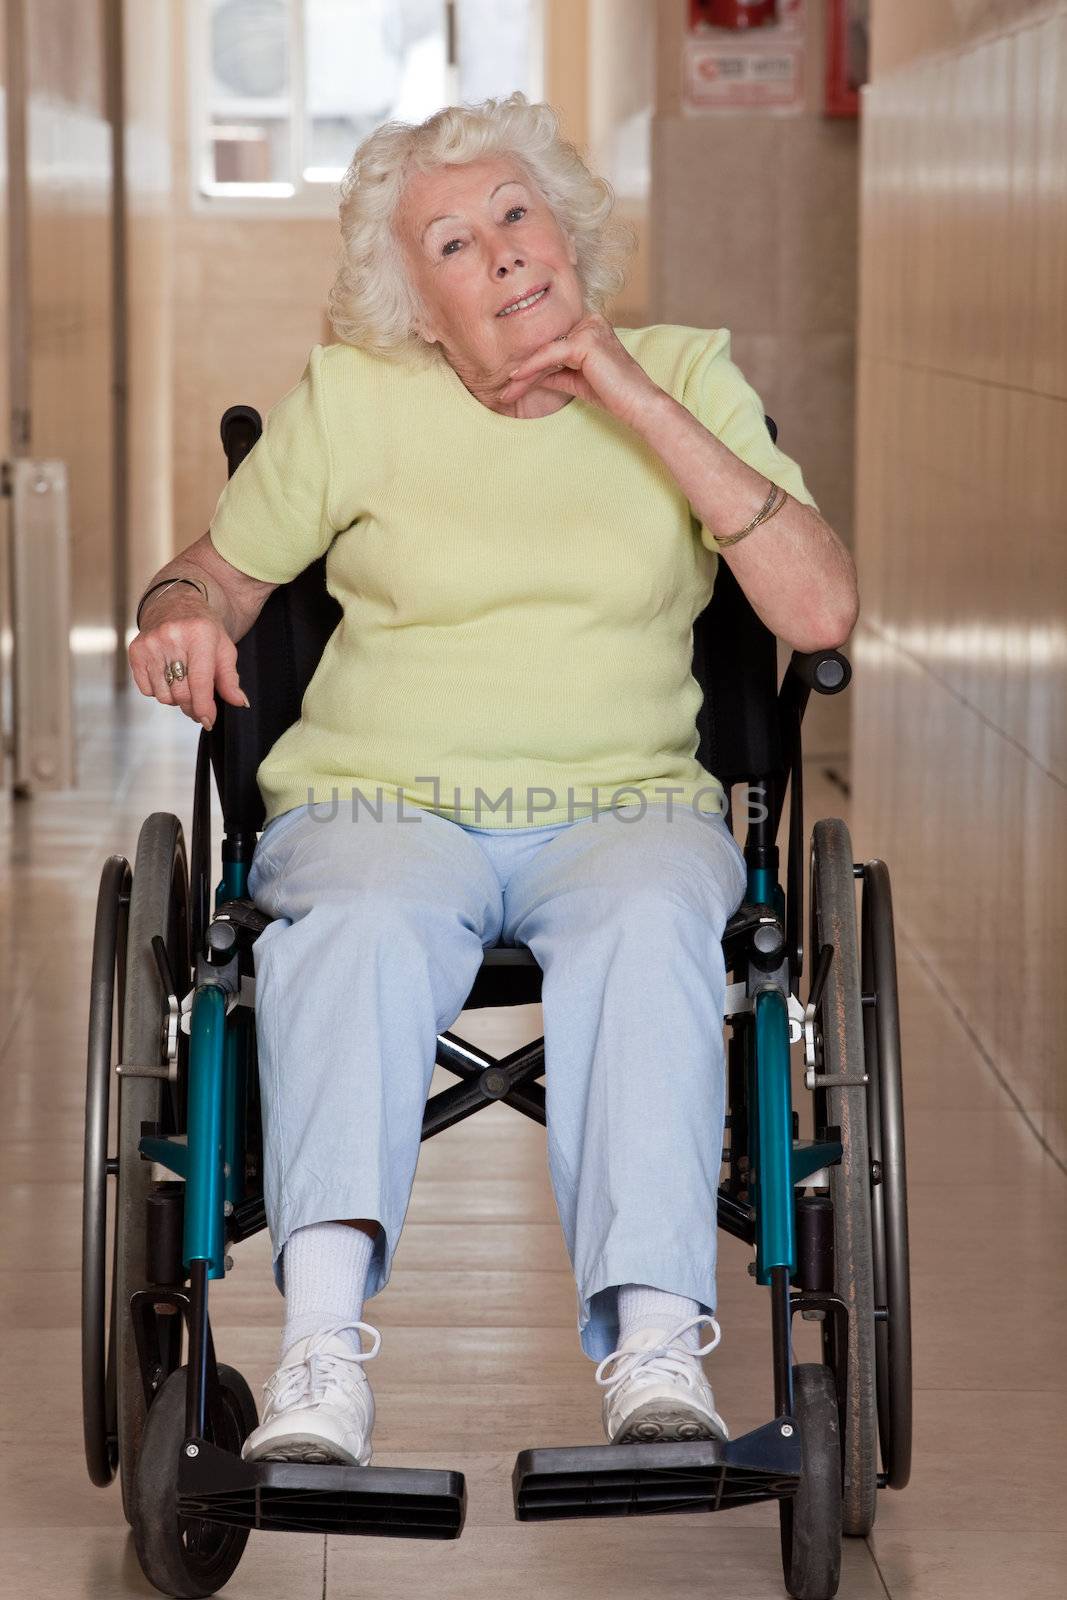 Retired woman on wheelchair at hospital.